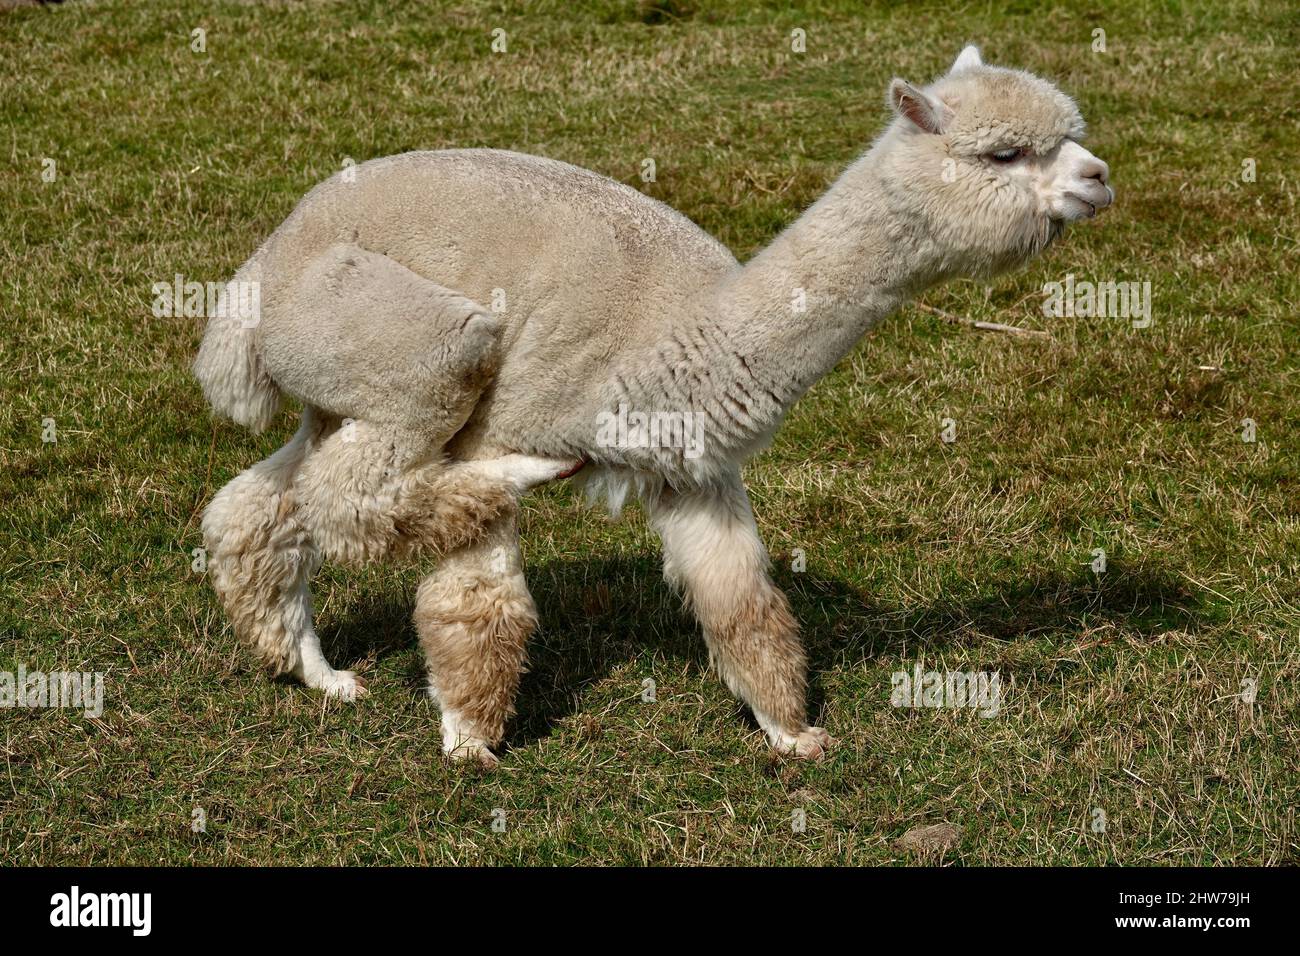 Cute adult llama alpaca standing on green grass and is about to scratch his hip with his hind legs. Stock Photo